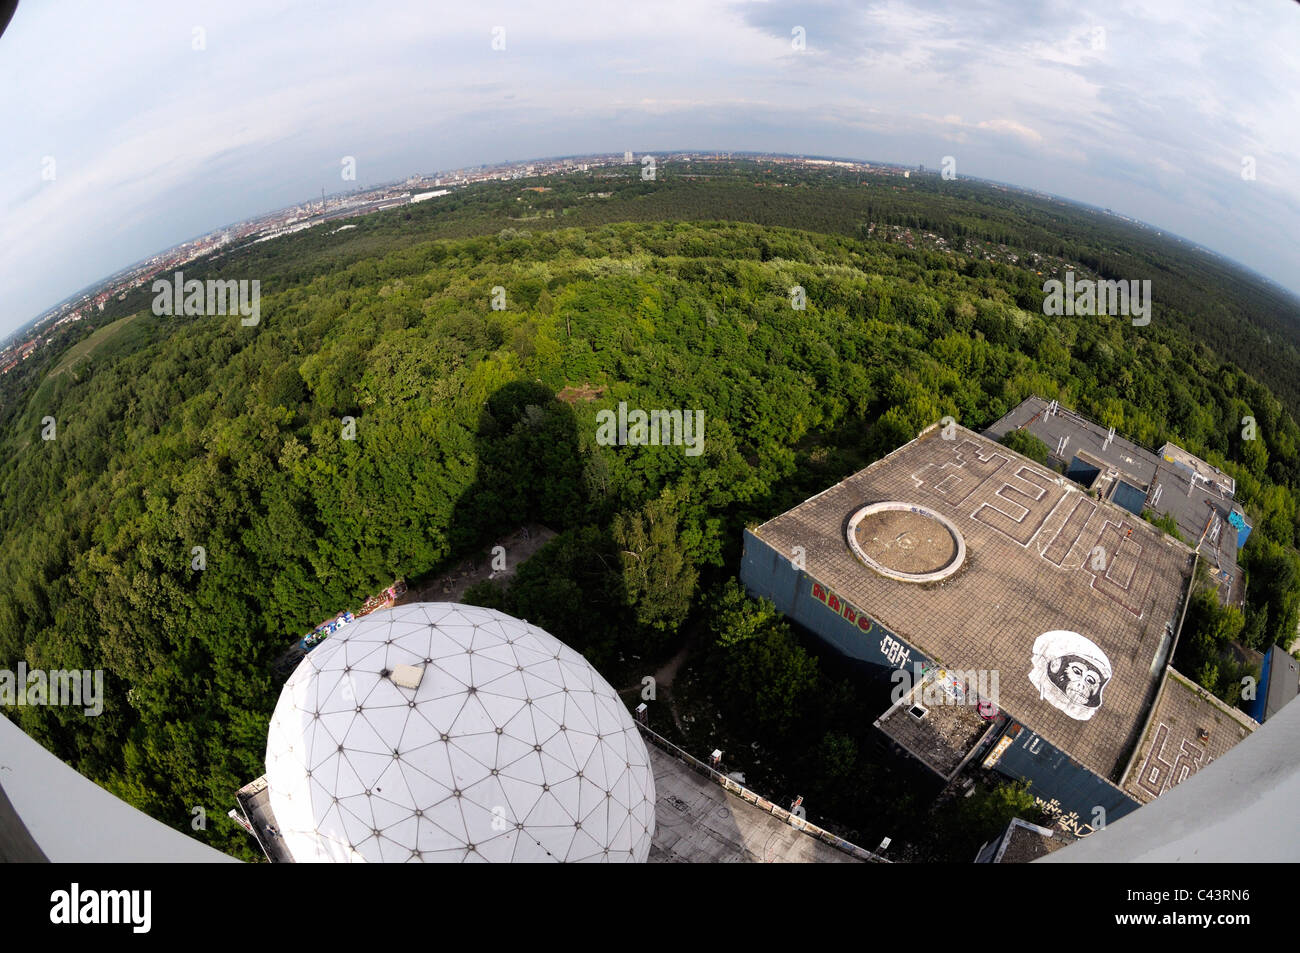 Teufelsberg is an abandoned radar station on the outskirts of Berlin, originally used for the Cold War, it is now abandoned. Stock Photo